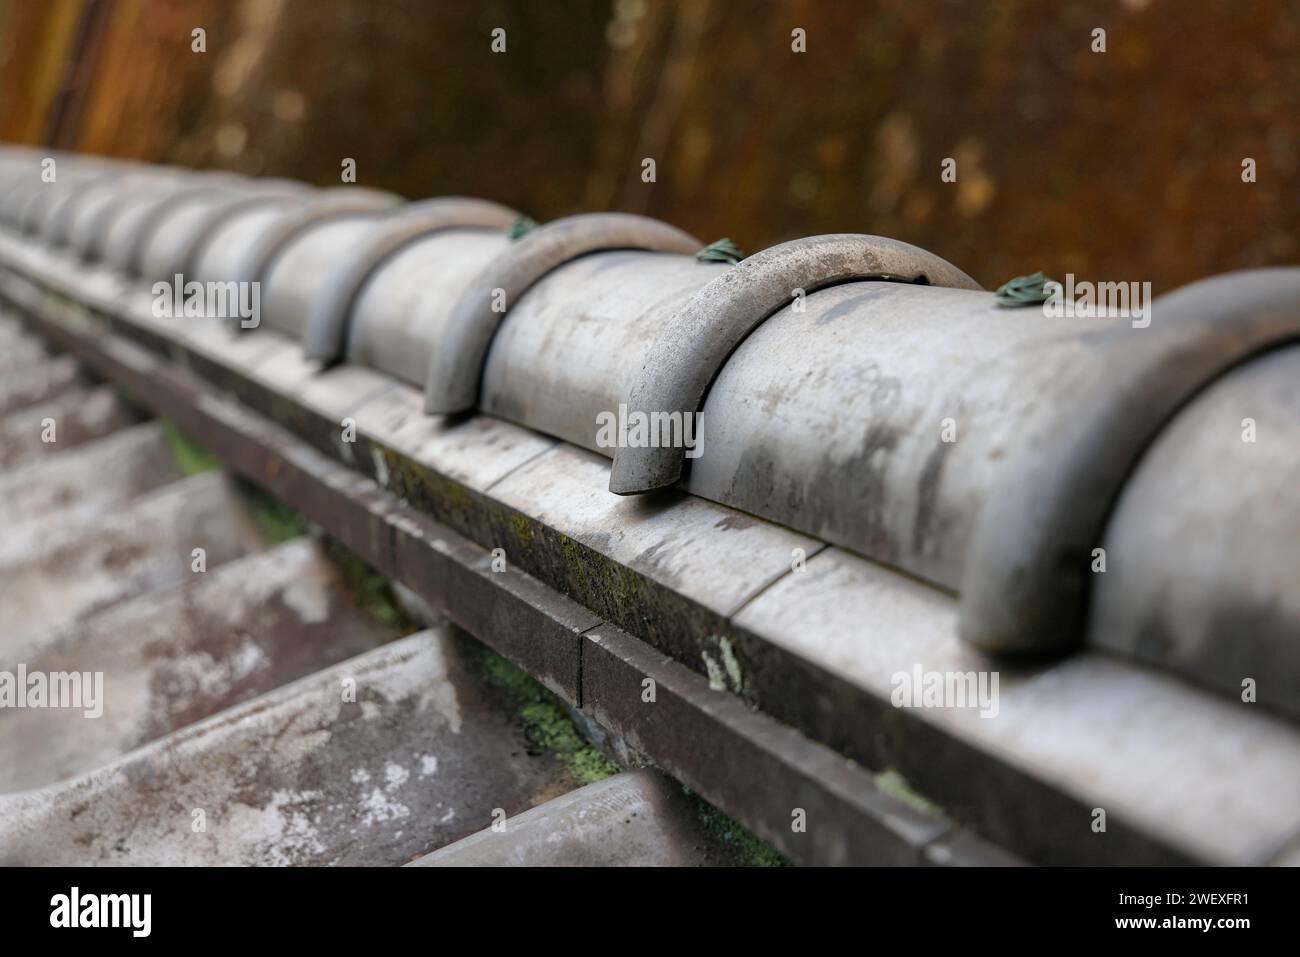 The traditional Japanese ridge tiles covering the ancient Japanese home. Stock Photo